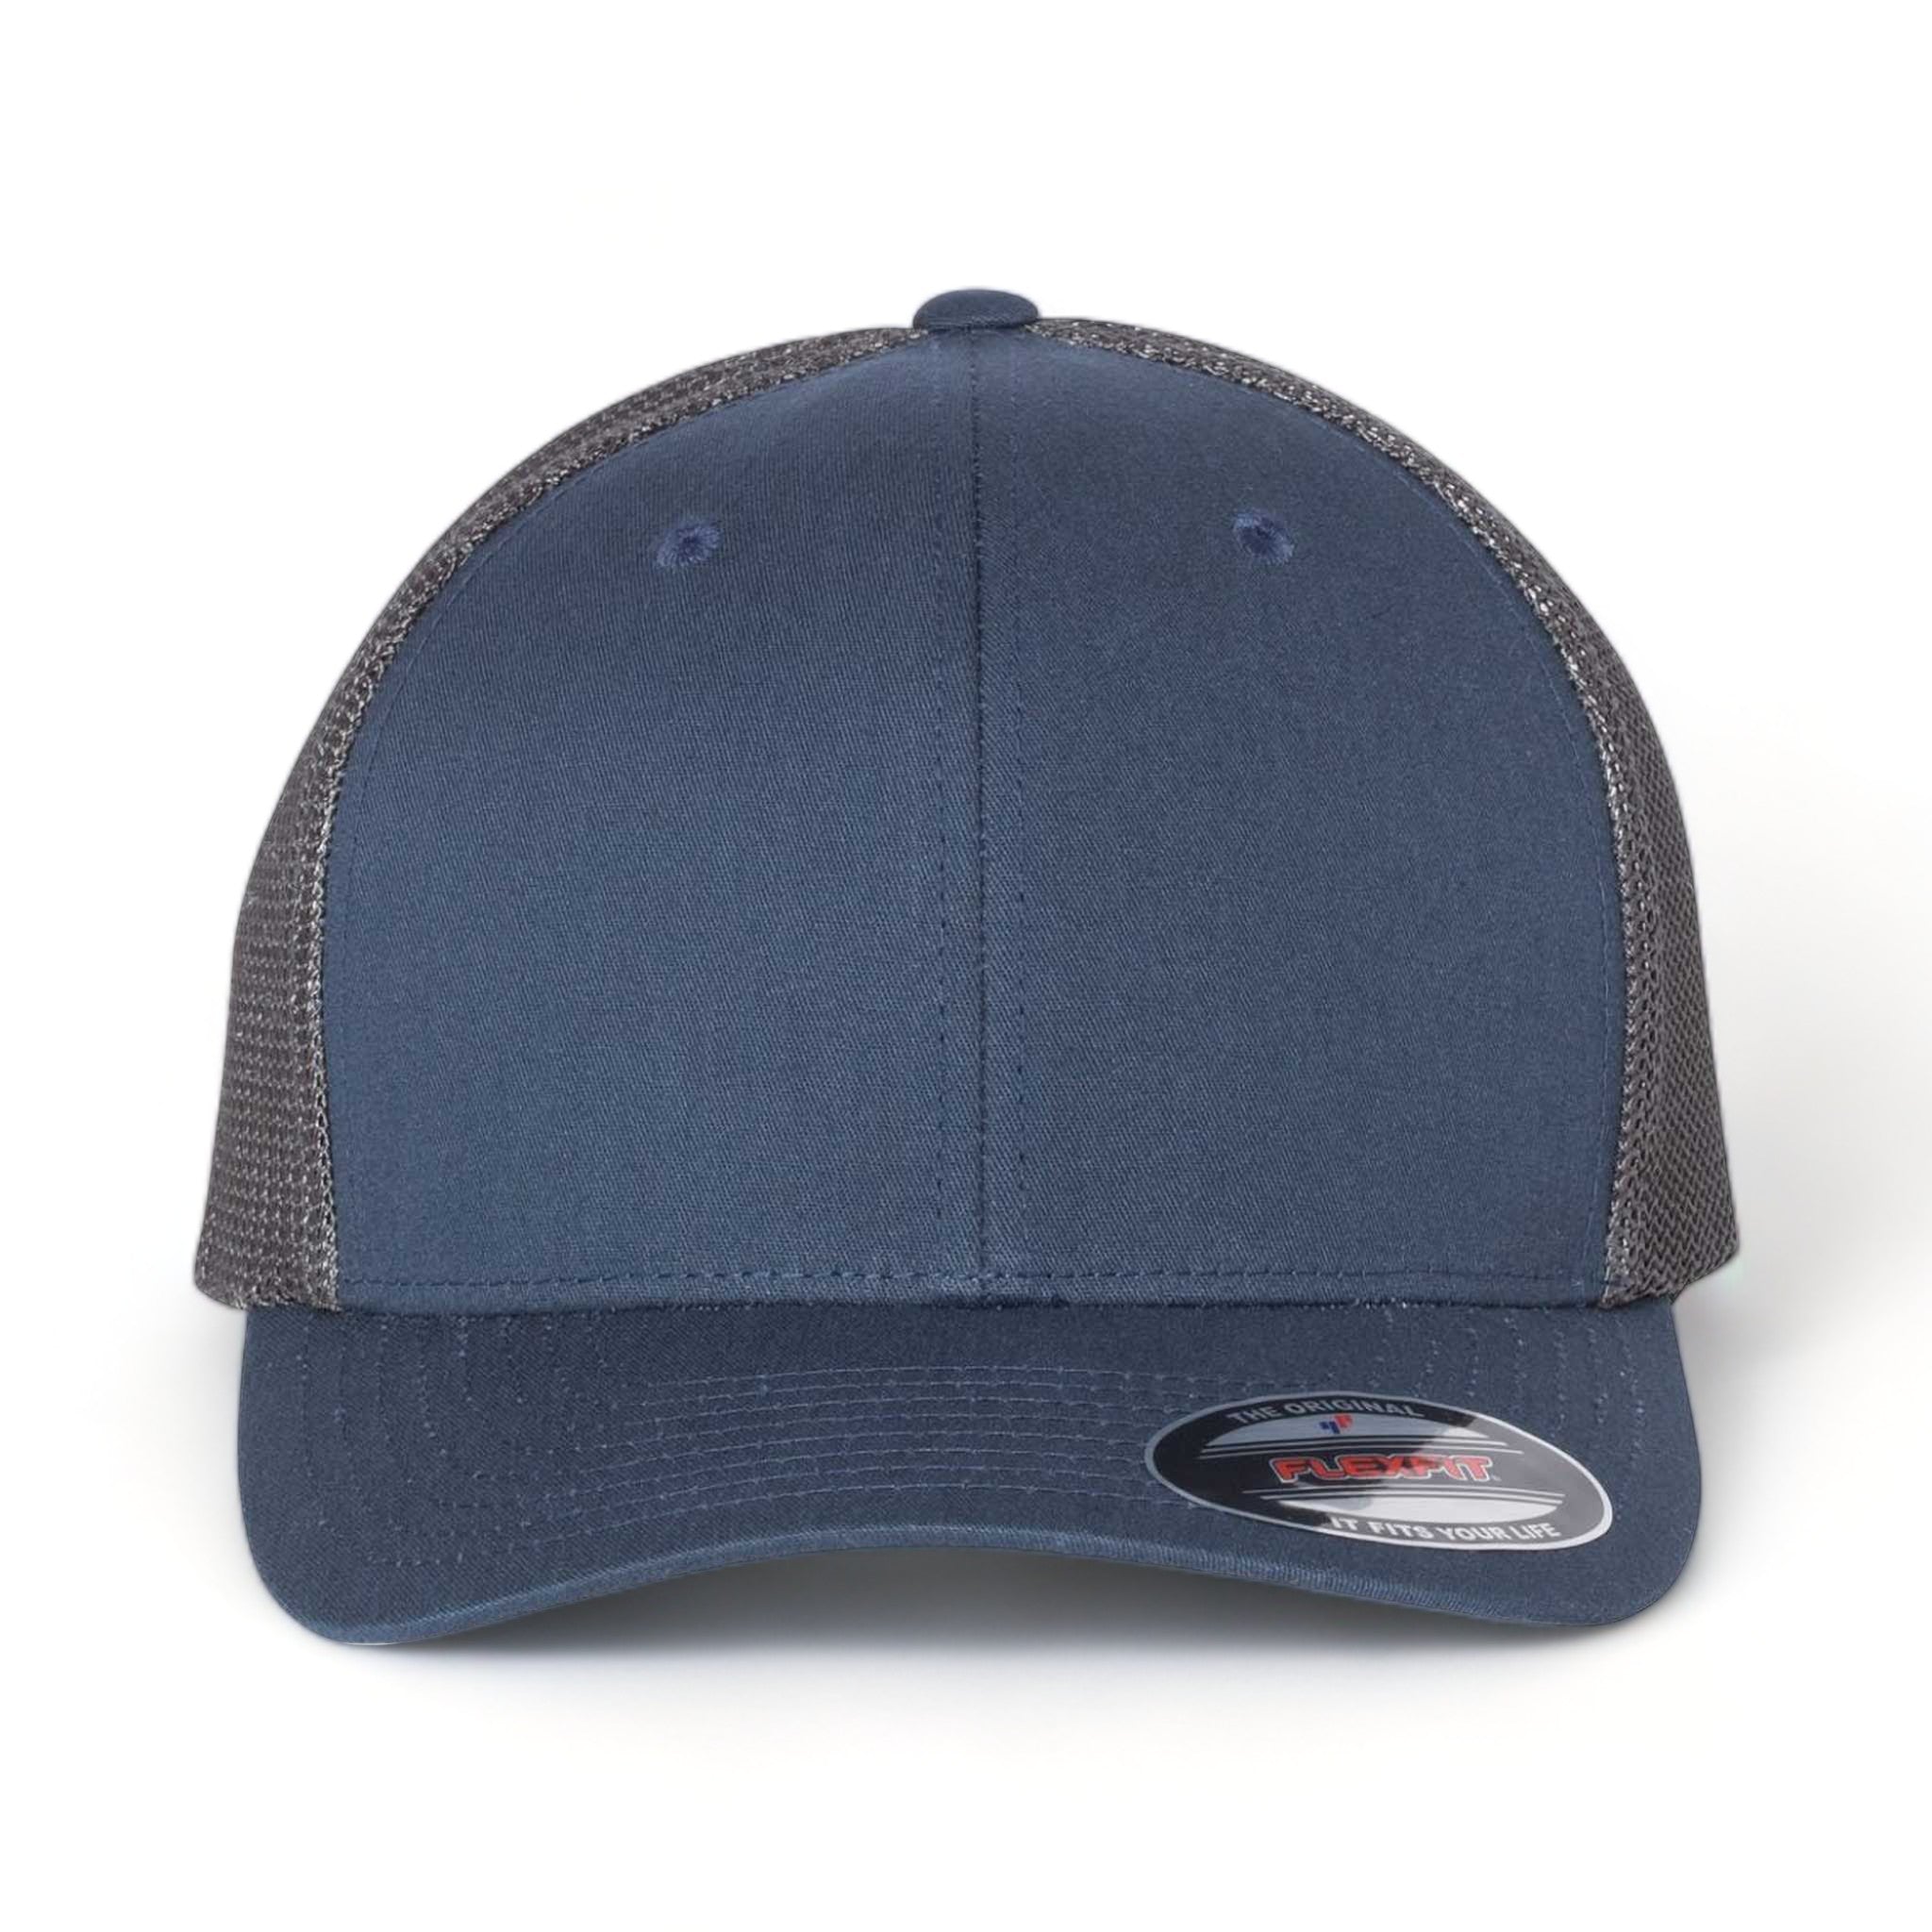 Front view of Flexfit 6511 custom hat in navy and graphite